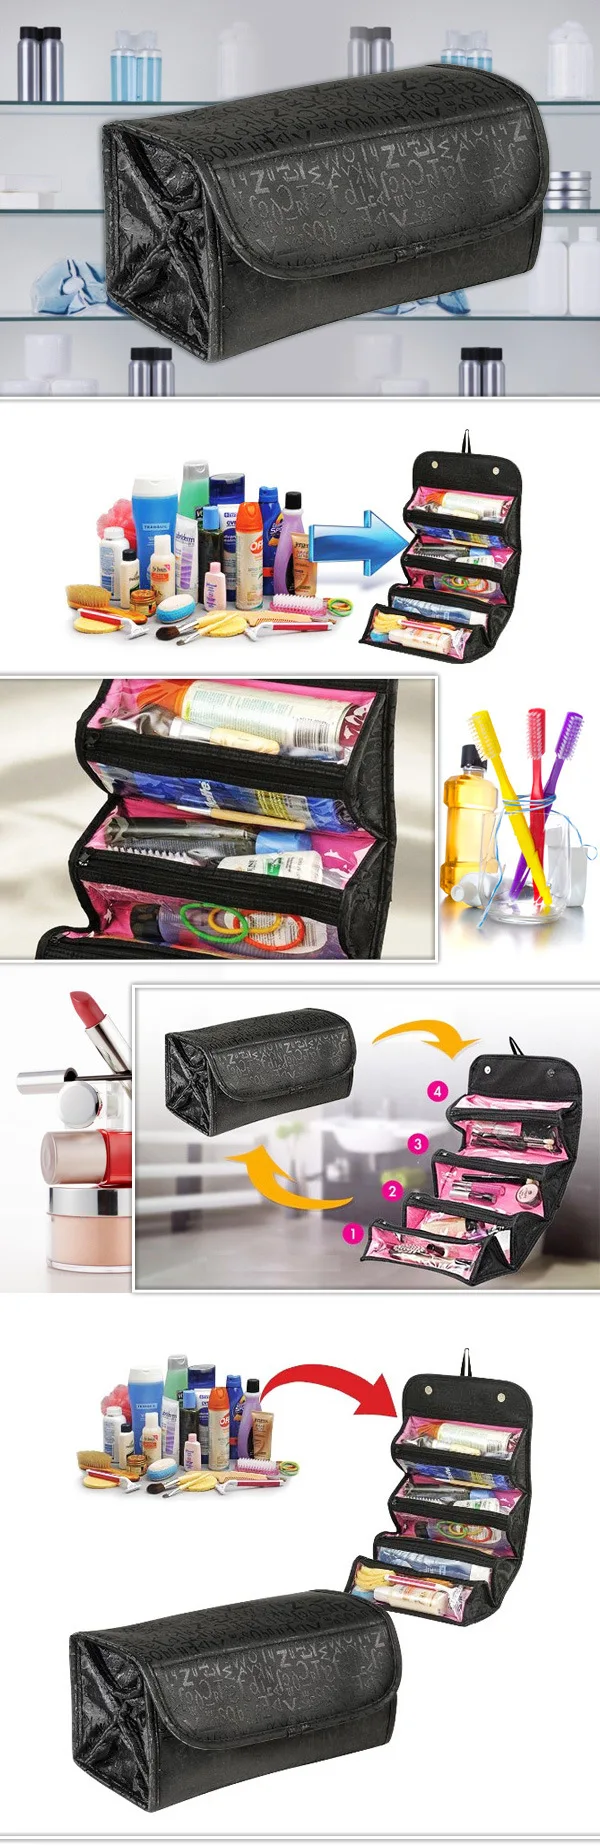 Large Capacity roll up cosmetic bag Storage Roll-N-Go folding hanging toiletry bag travel wash